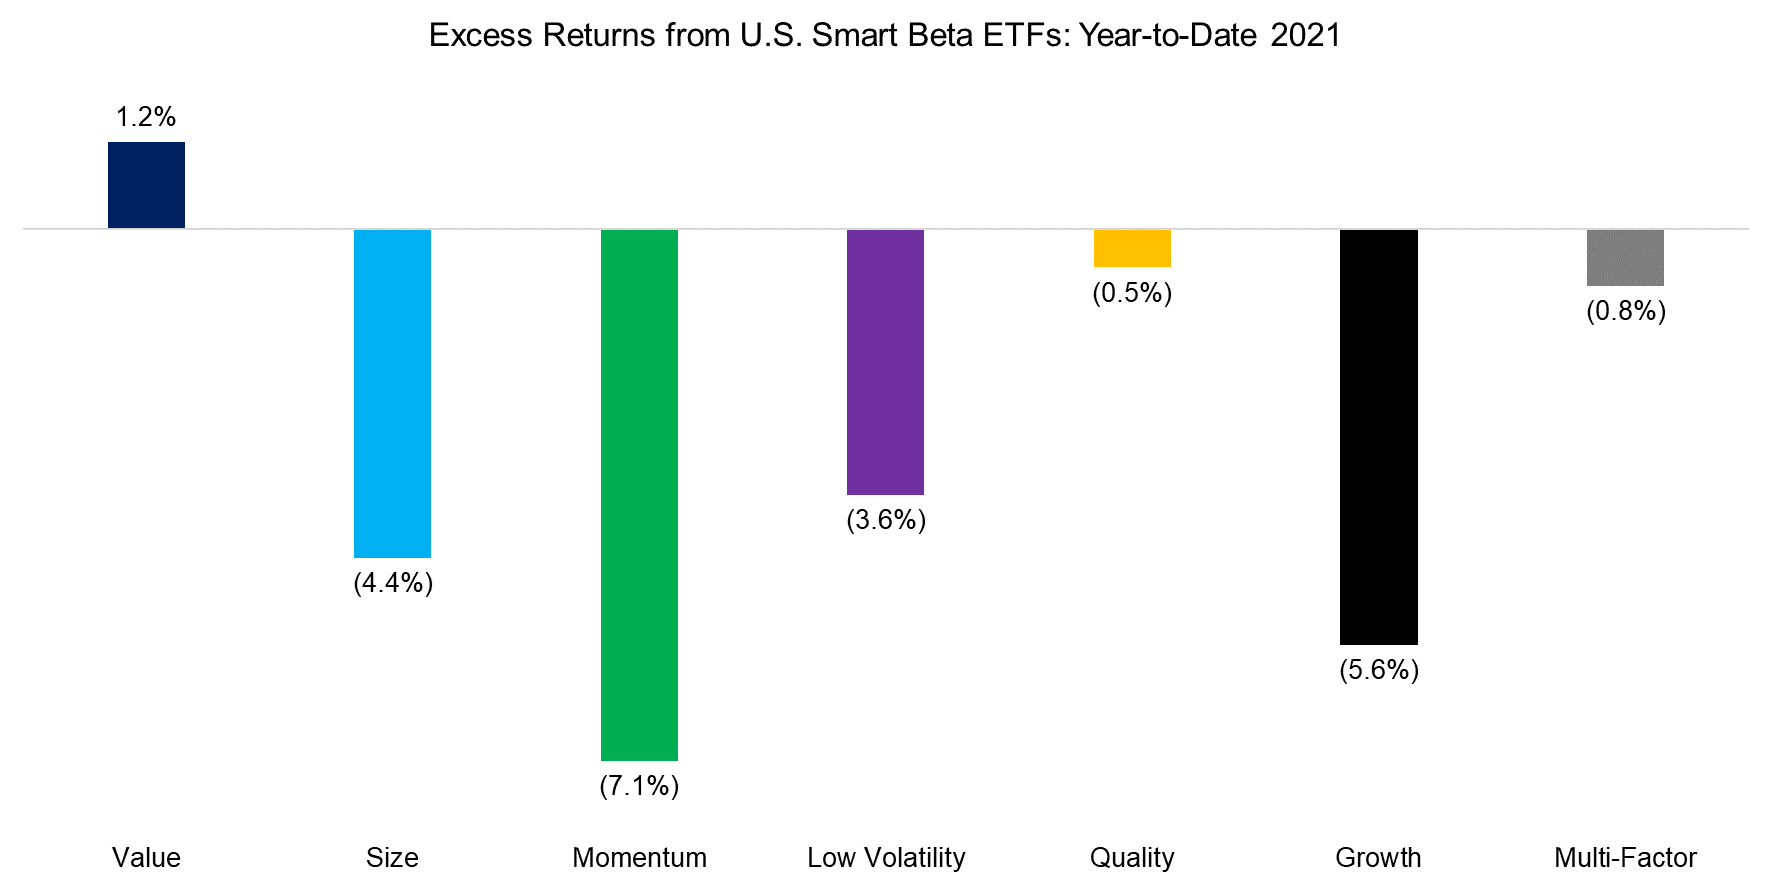 Excess Returns from U.S. Smart Beta ETFs Year-to-Date 2021